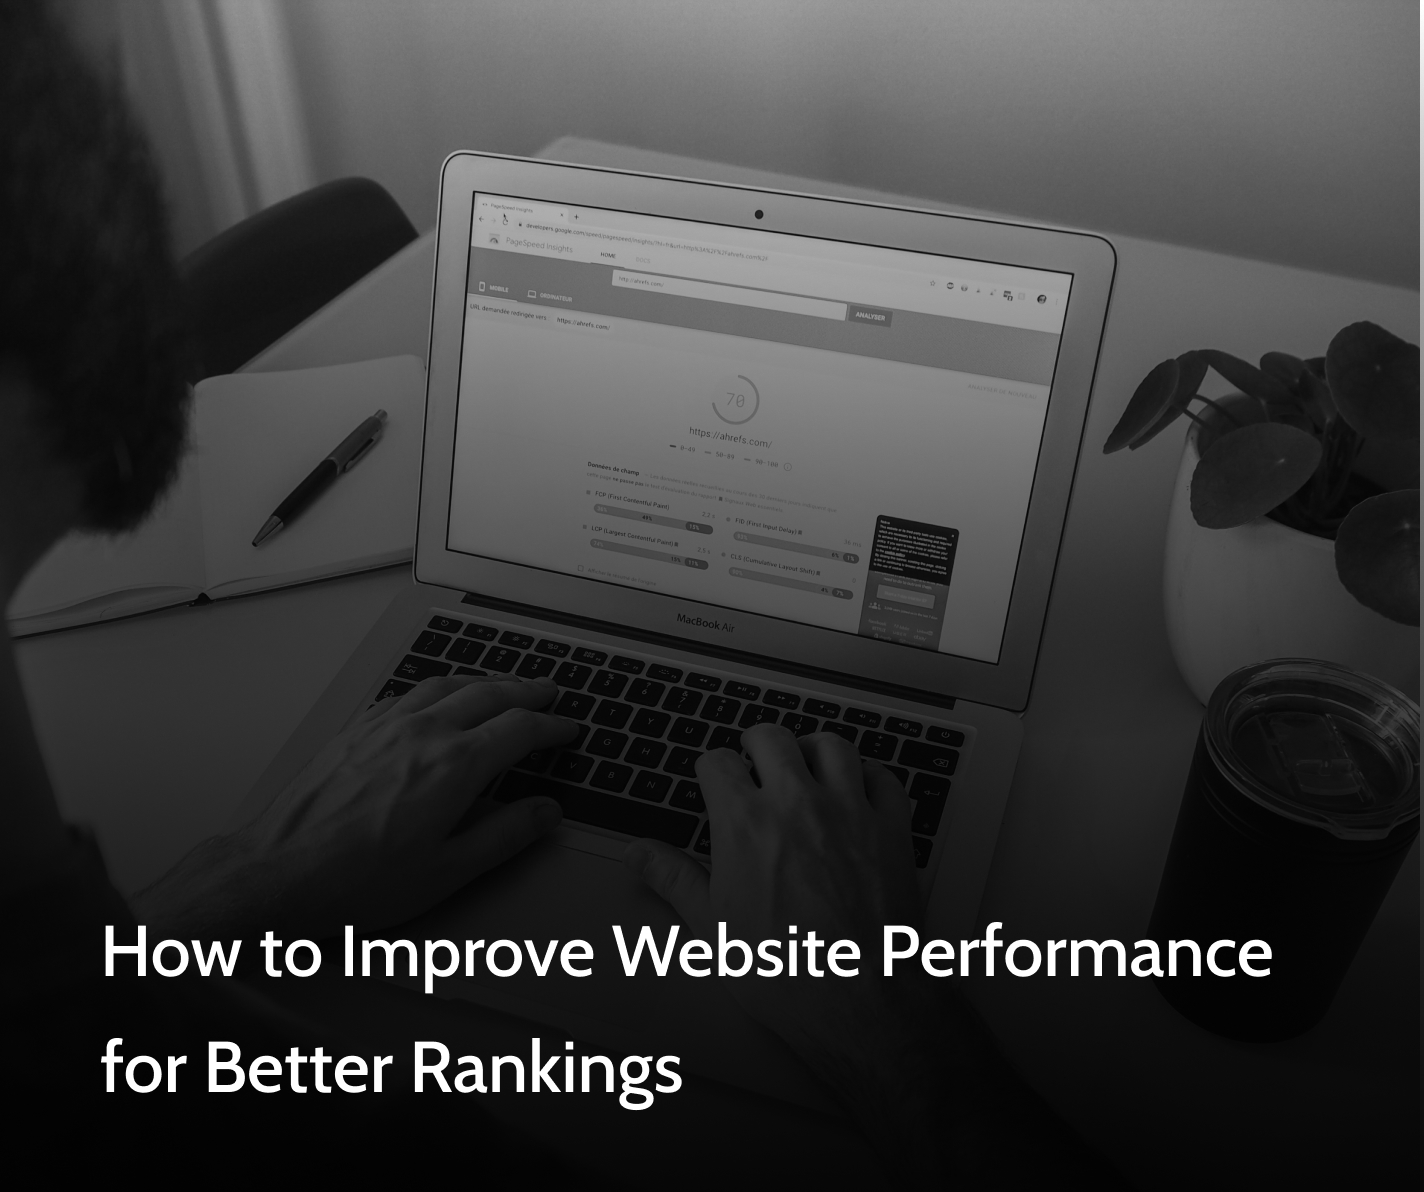 How to Improve Website Performance for Better Rankings